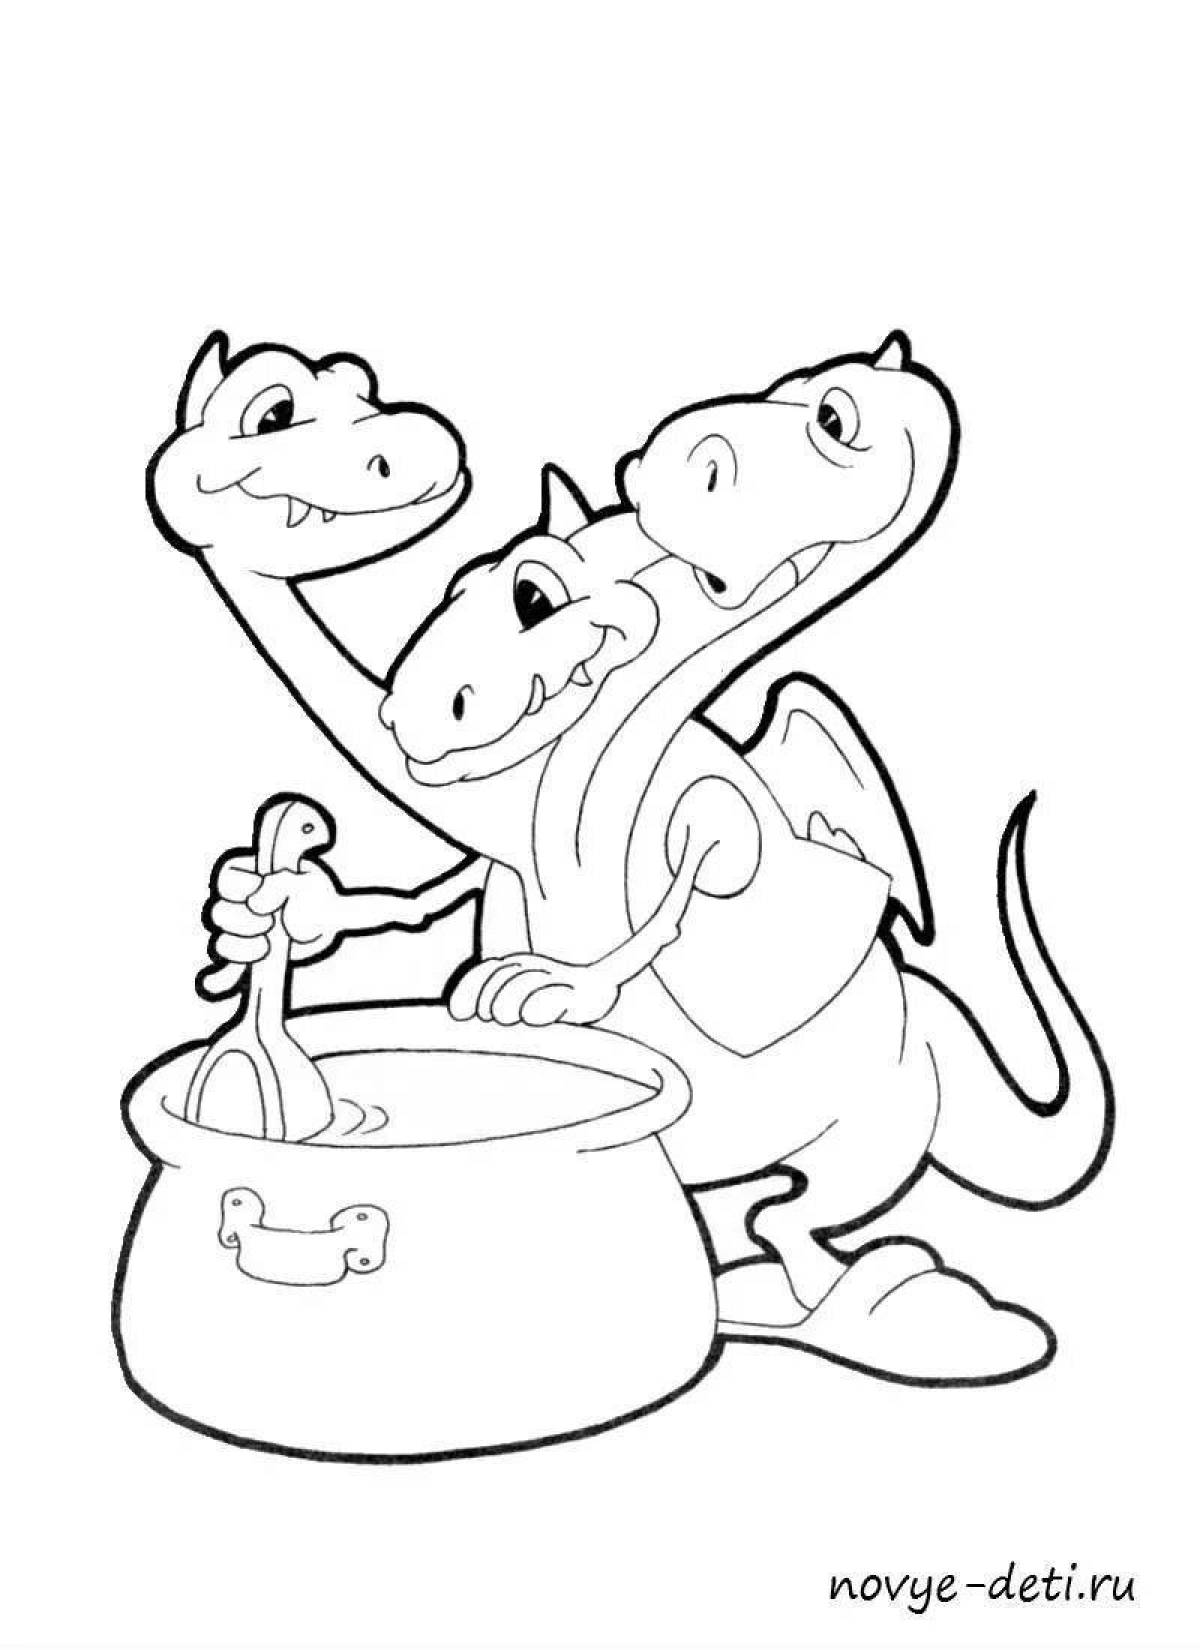 Generous Gorynych coloring page